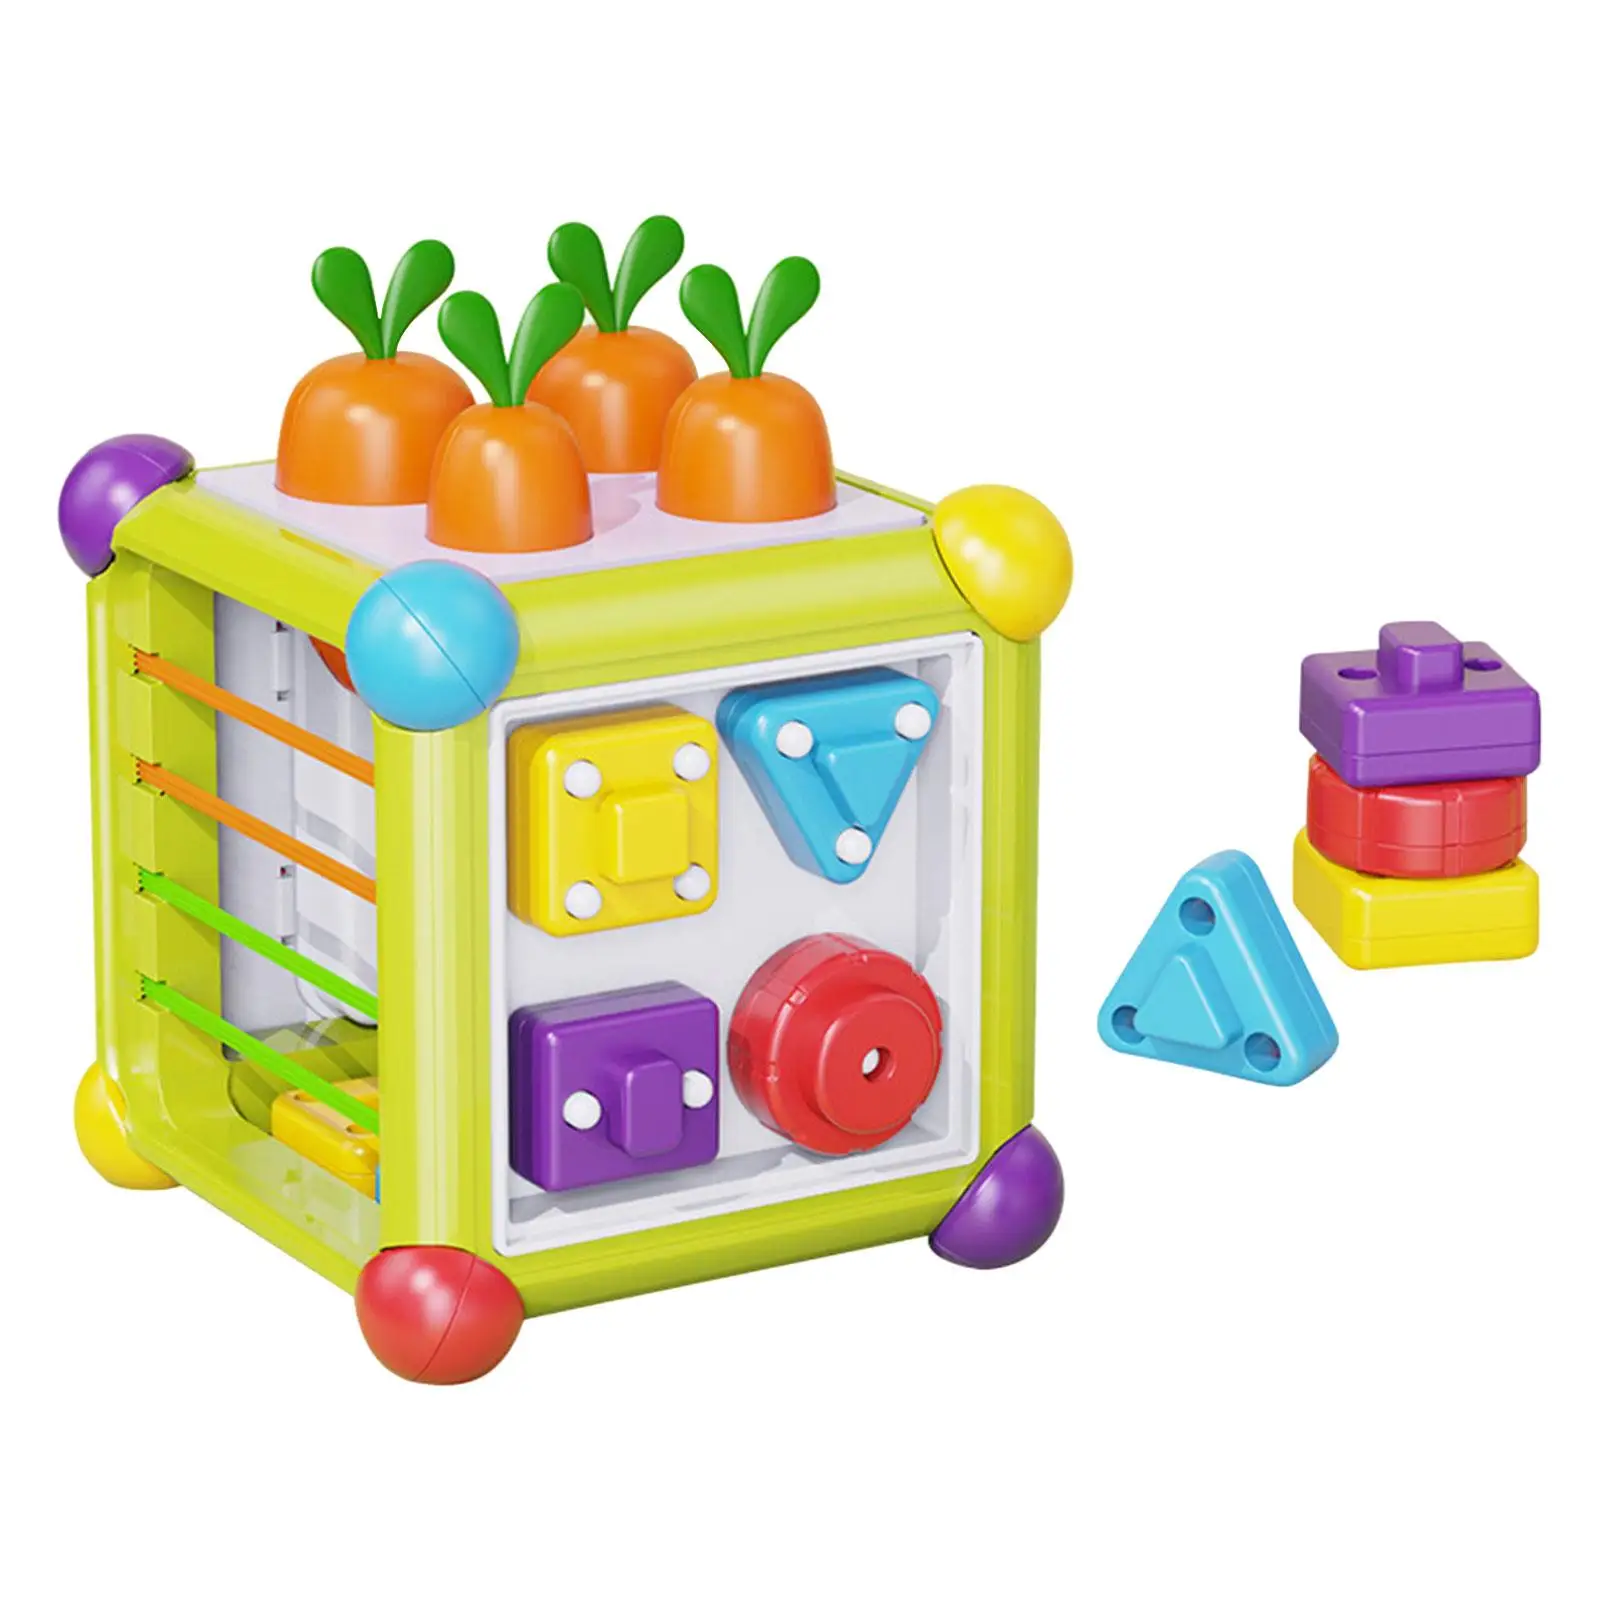 Activity Cube Color Recognition Matching Sensory Cube Bin Shape Sorter Toys for Girls Boys Toddlers Birthday Gift Children Baby